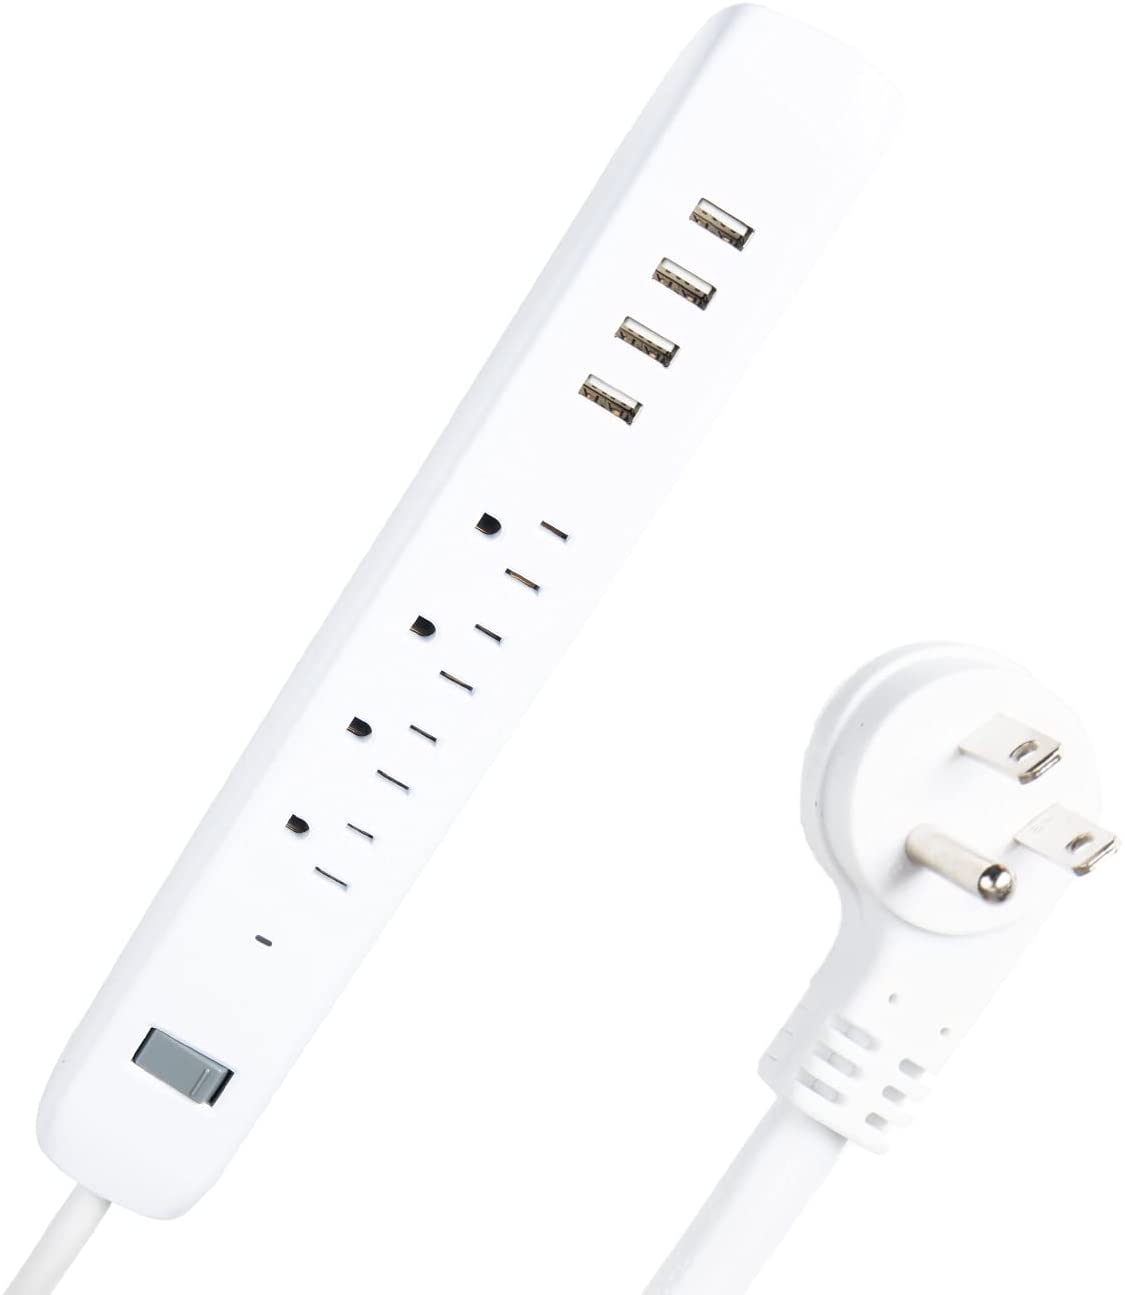 Surge Protector Power Strip with 4 USB Ports, 4 Electrical Outlets & 6 Ft White Extension Cord, 15A/1875W, ETL Listed